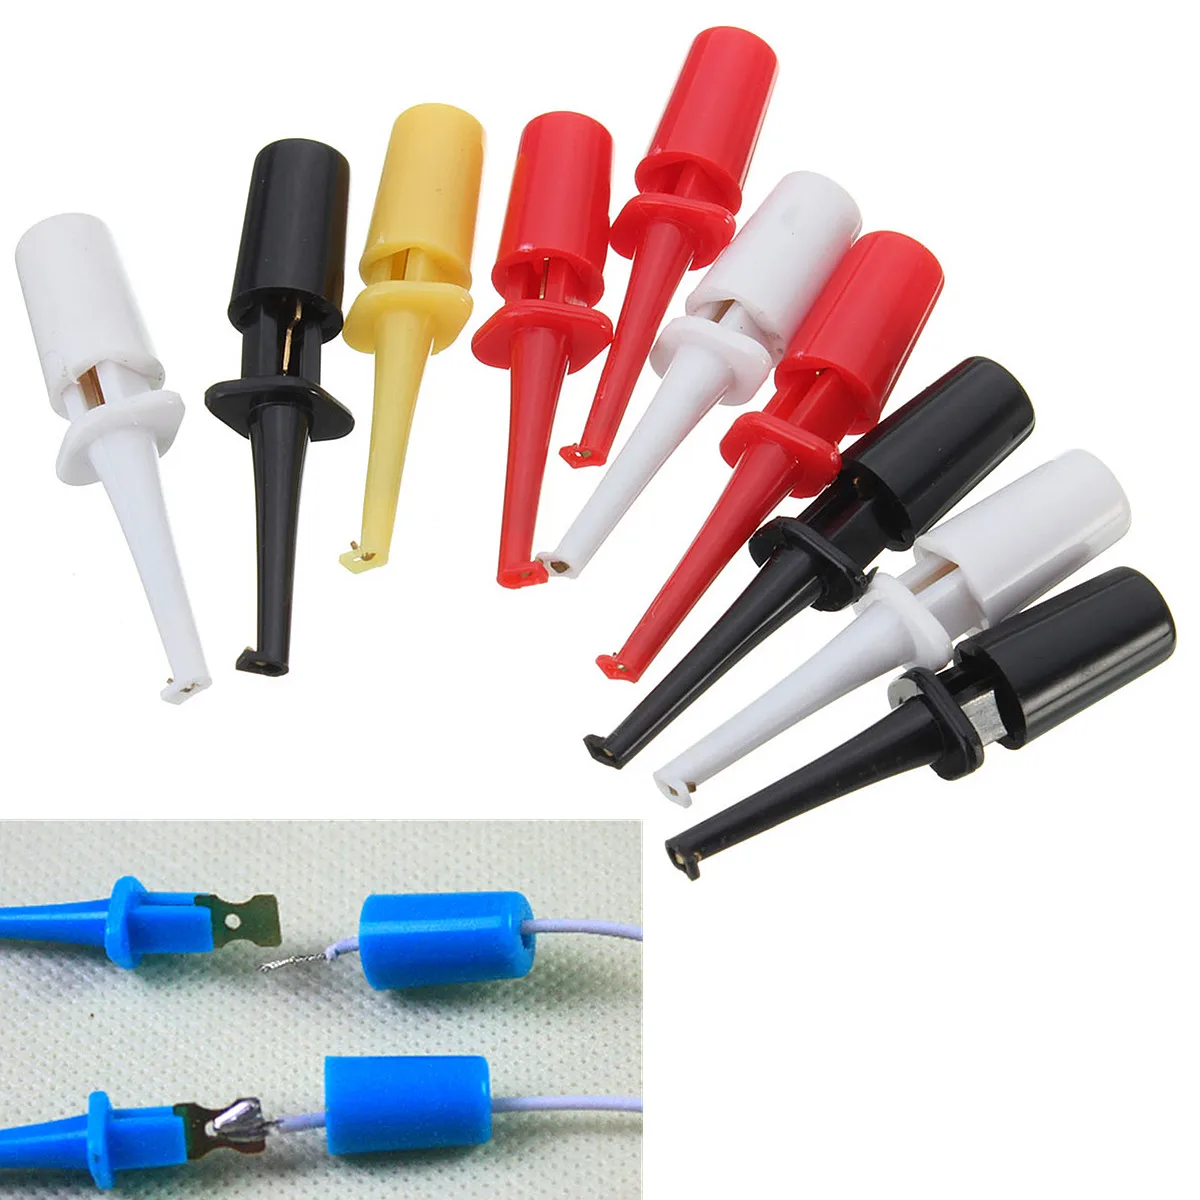 12x Useful multimeter lead wire test probe hook clip set grabbers connector TO 